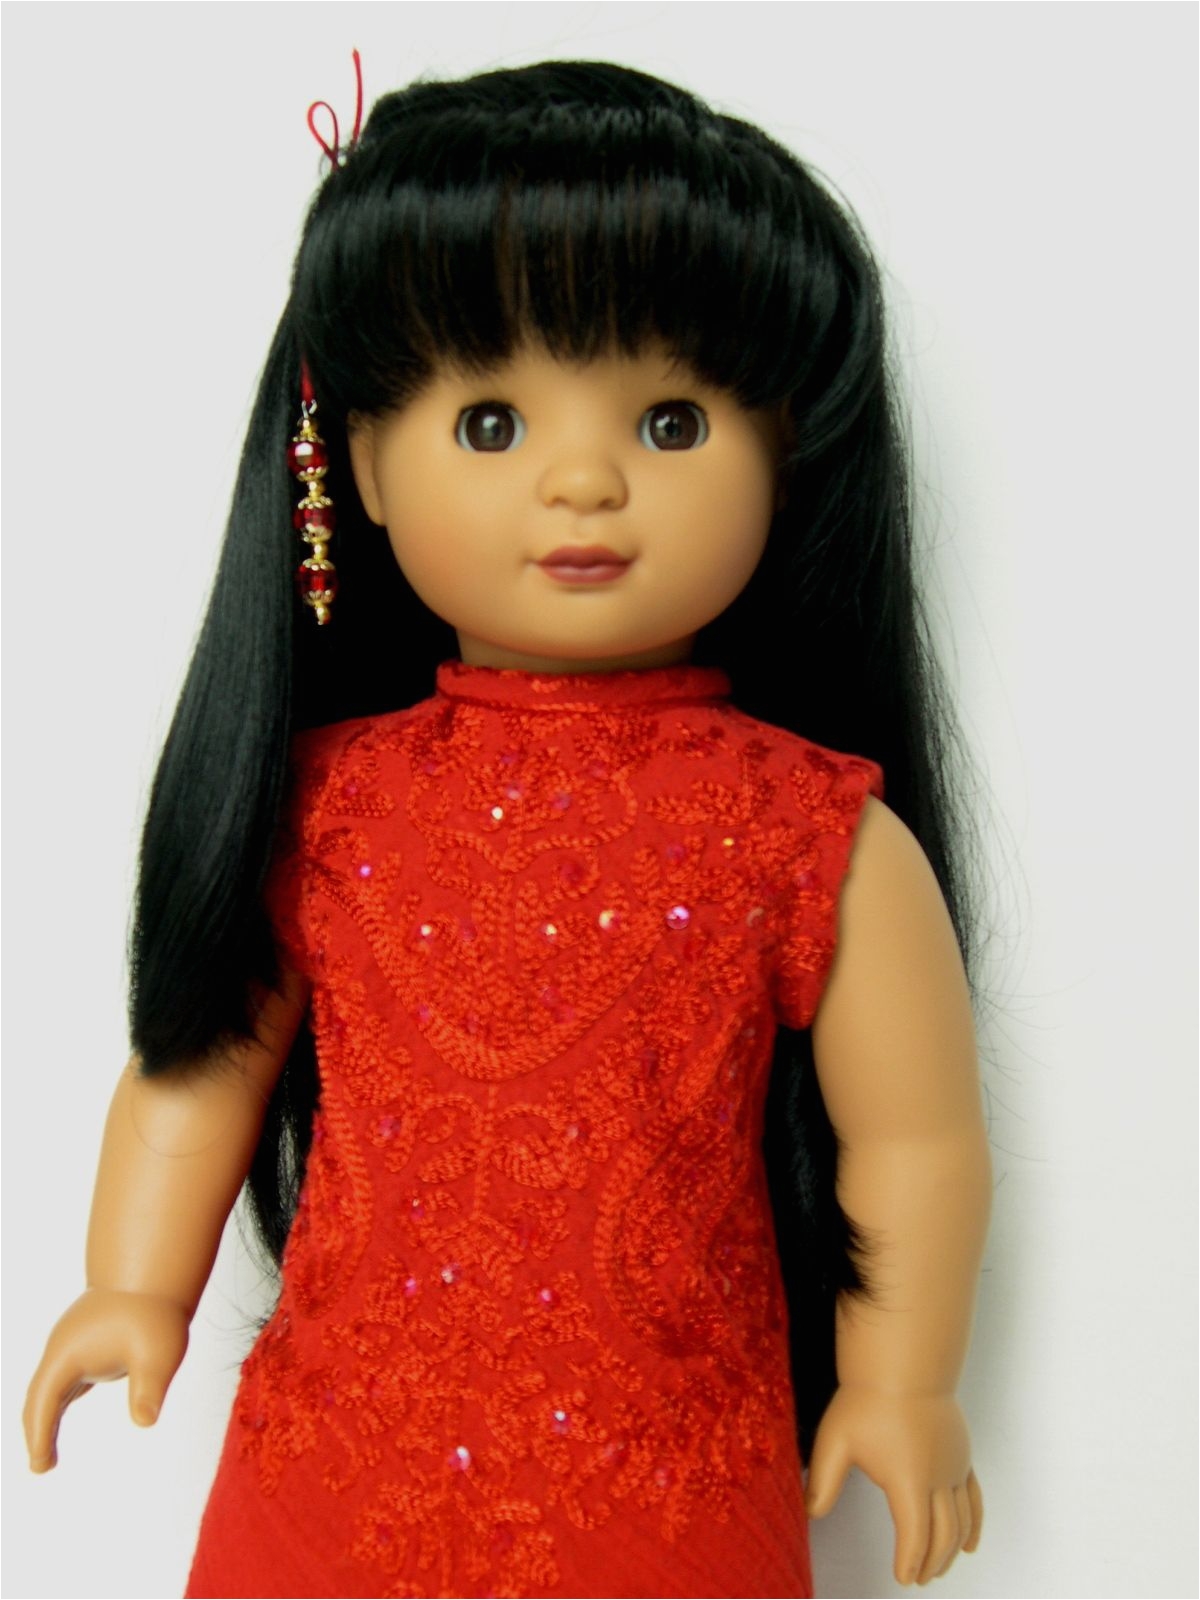 doll clothes made to fit 18 inch dolls like american girl alicia by gotz is modeling a dress upcycled or refashioned from a ladies blouse see my